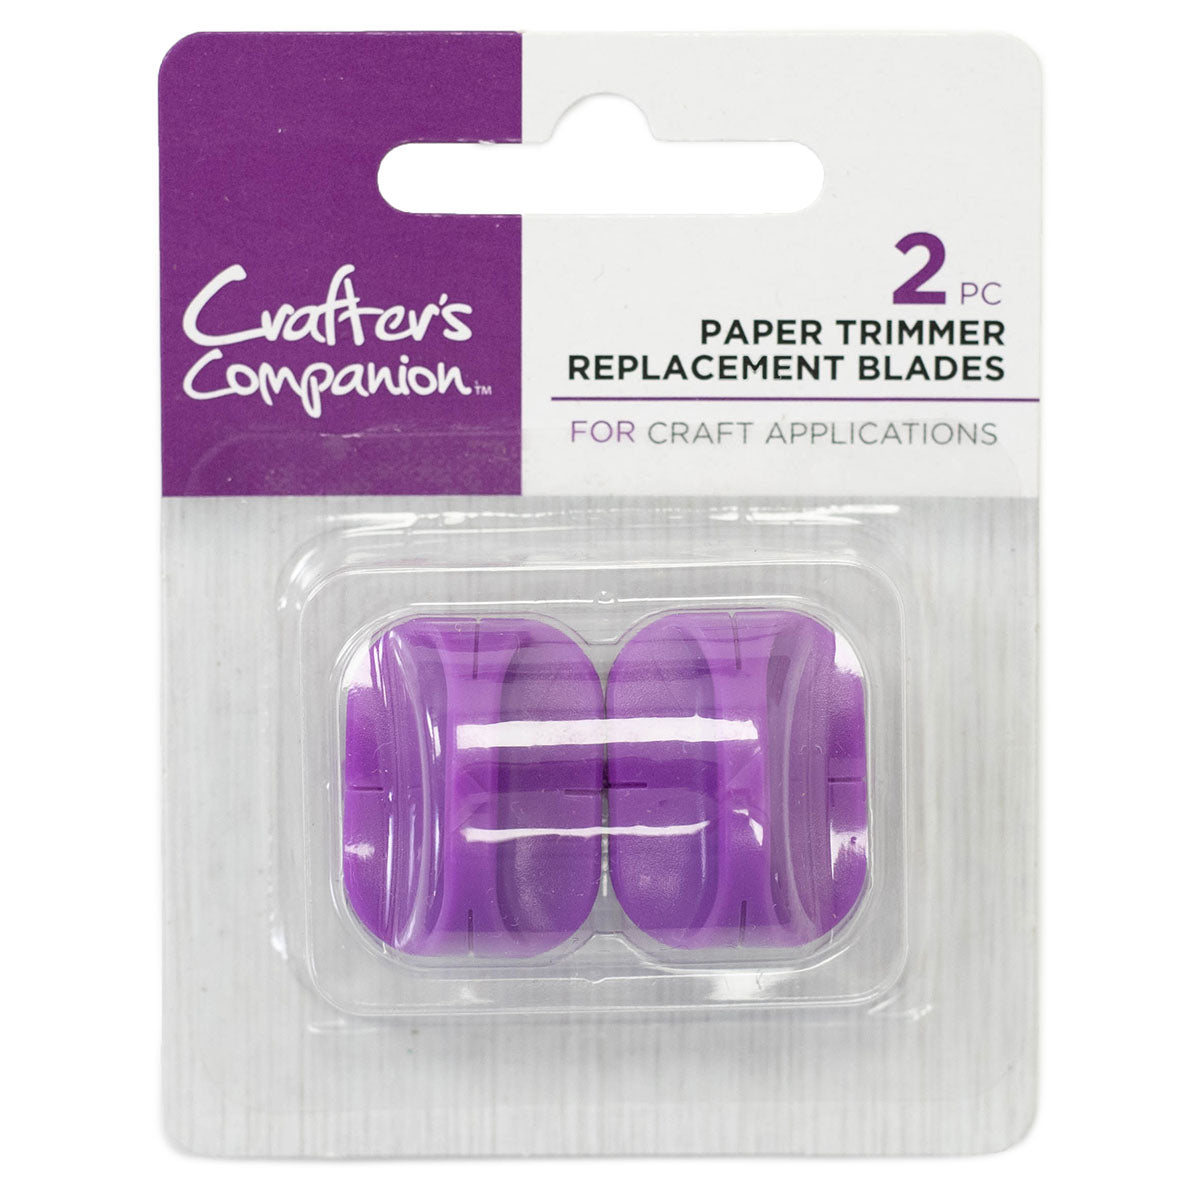 Crafter's Companion - Paper Trimmer - 3" x 12"